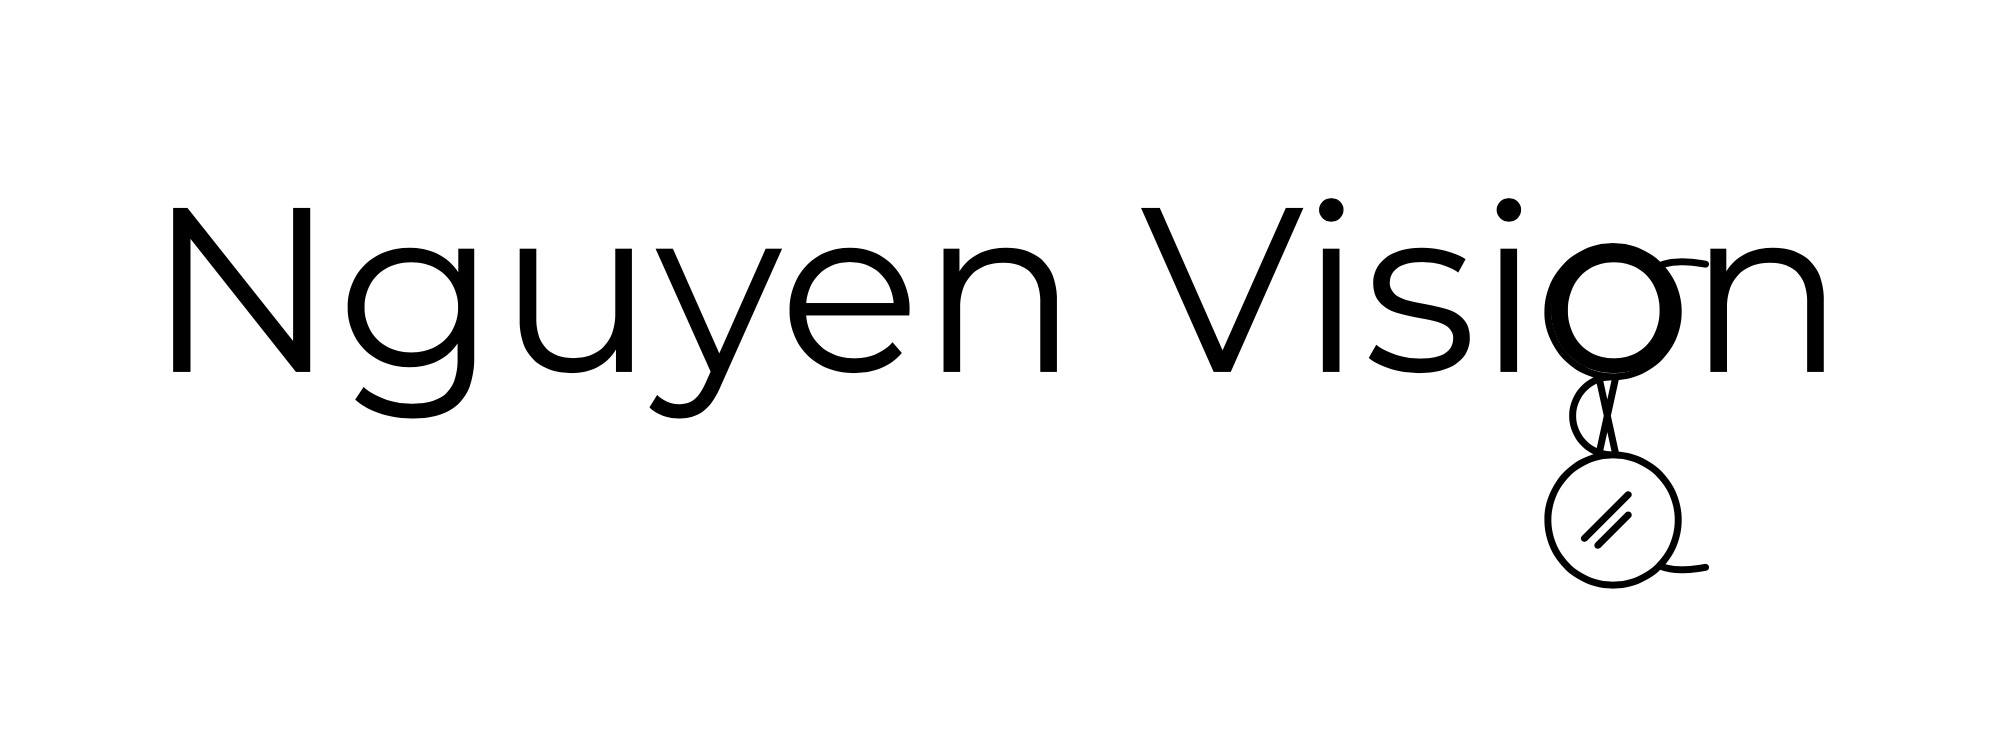 Nguyen Vision - Therapeutic Optometry